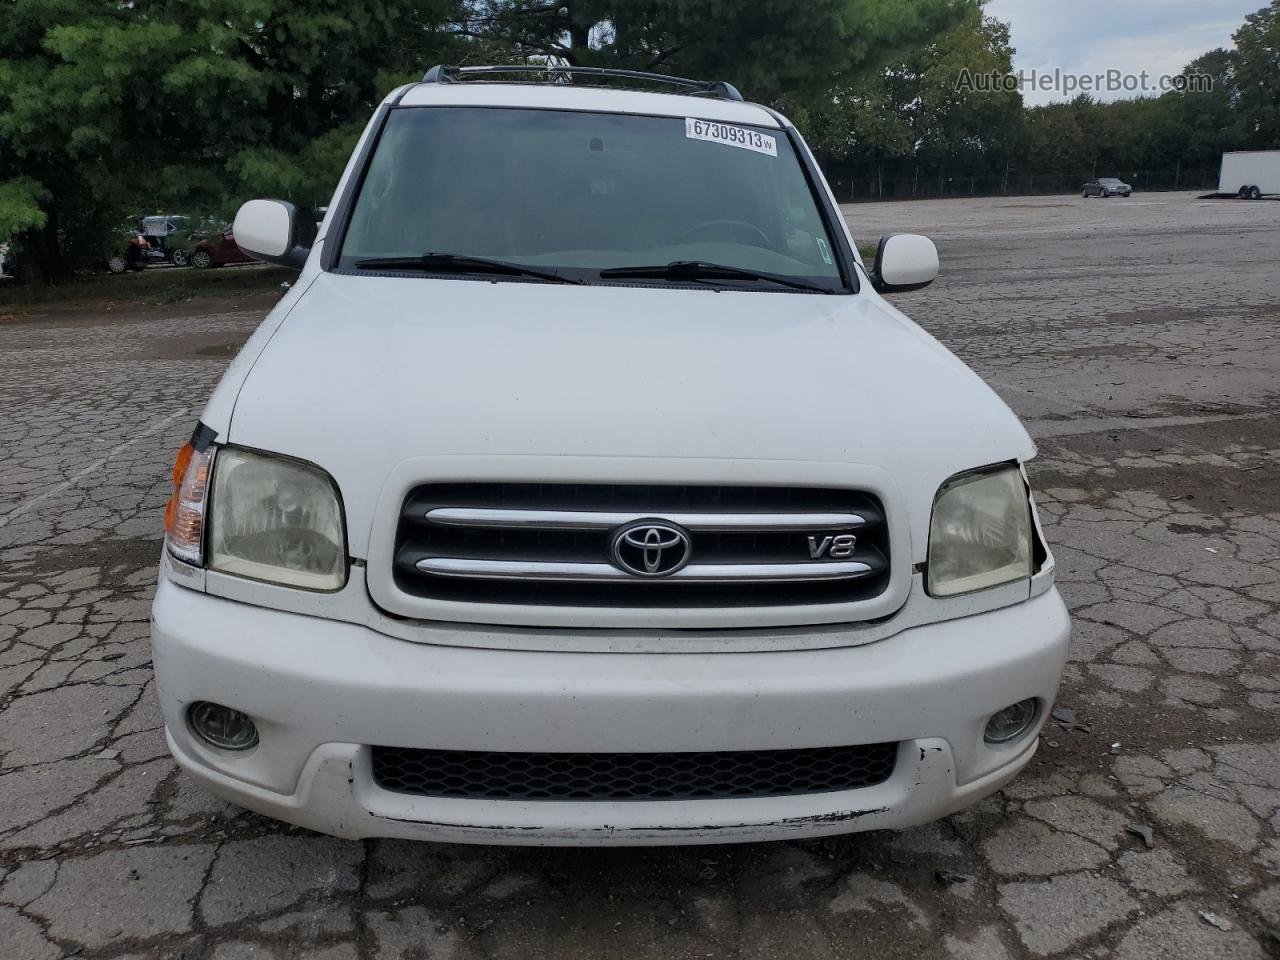 2002 Toyota Sequoia Limited White vin: 5TDBT48A22S109788